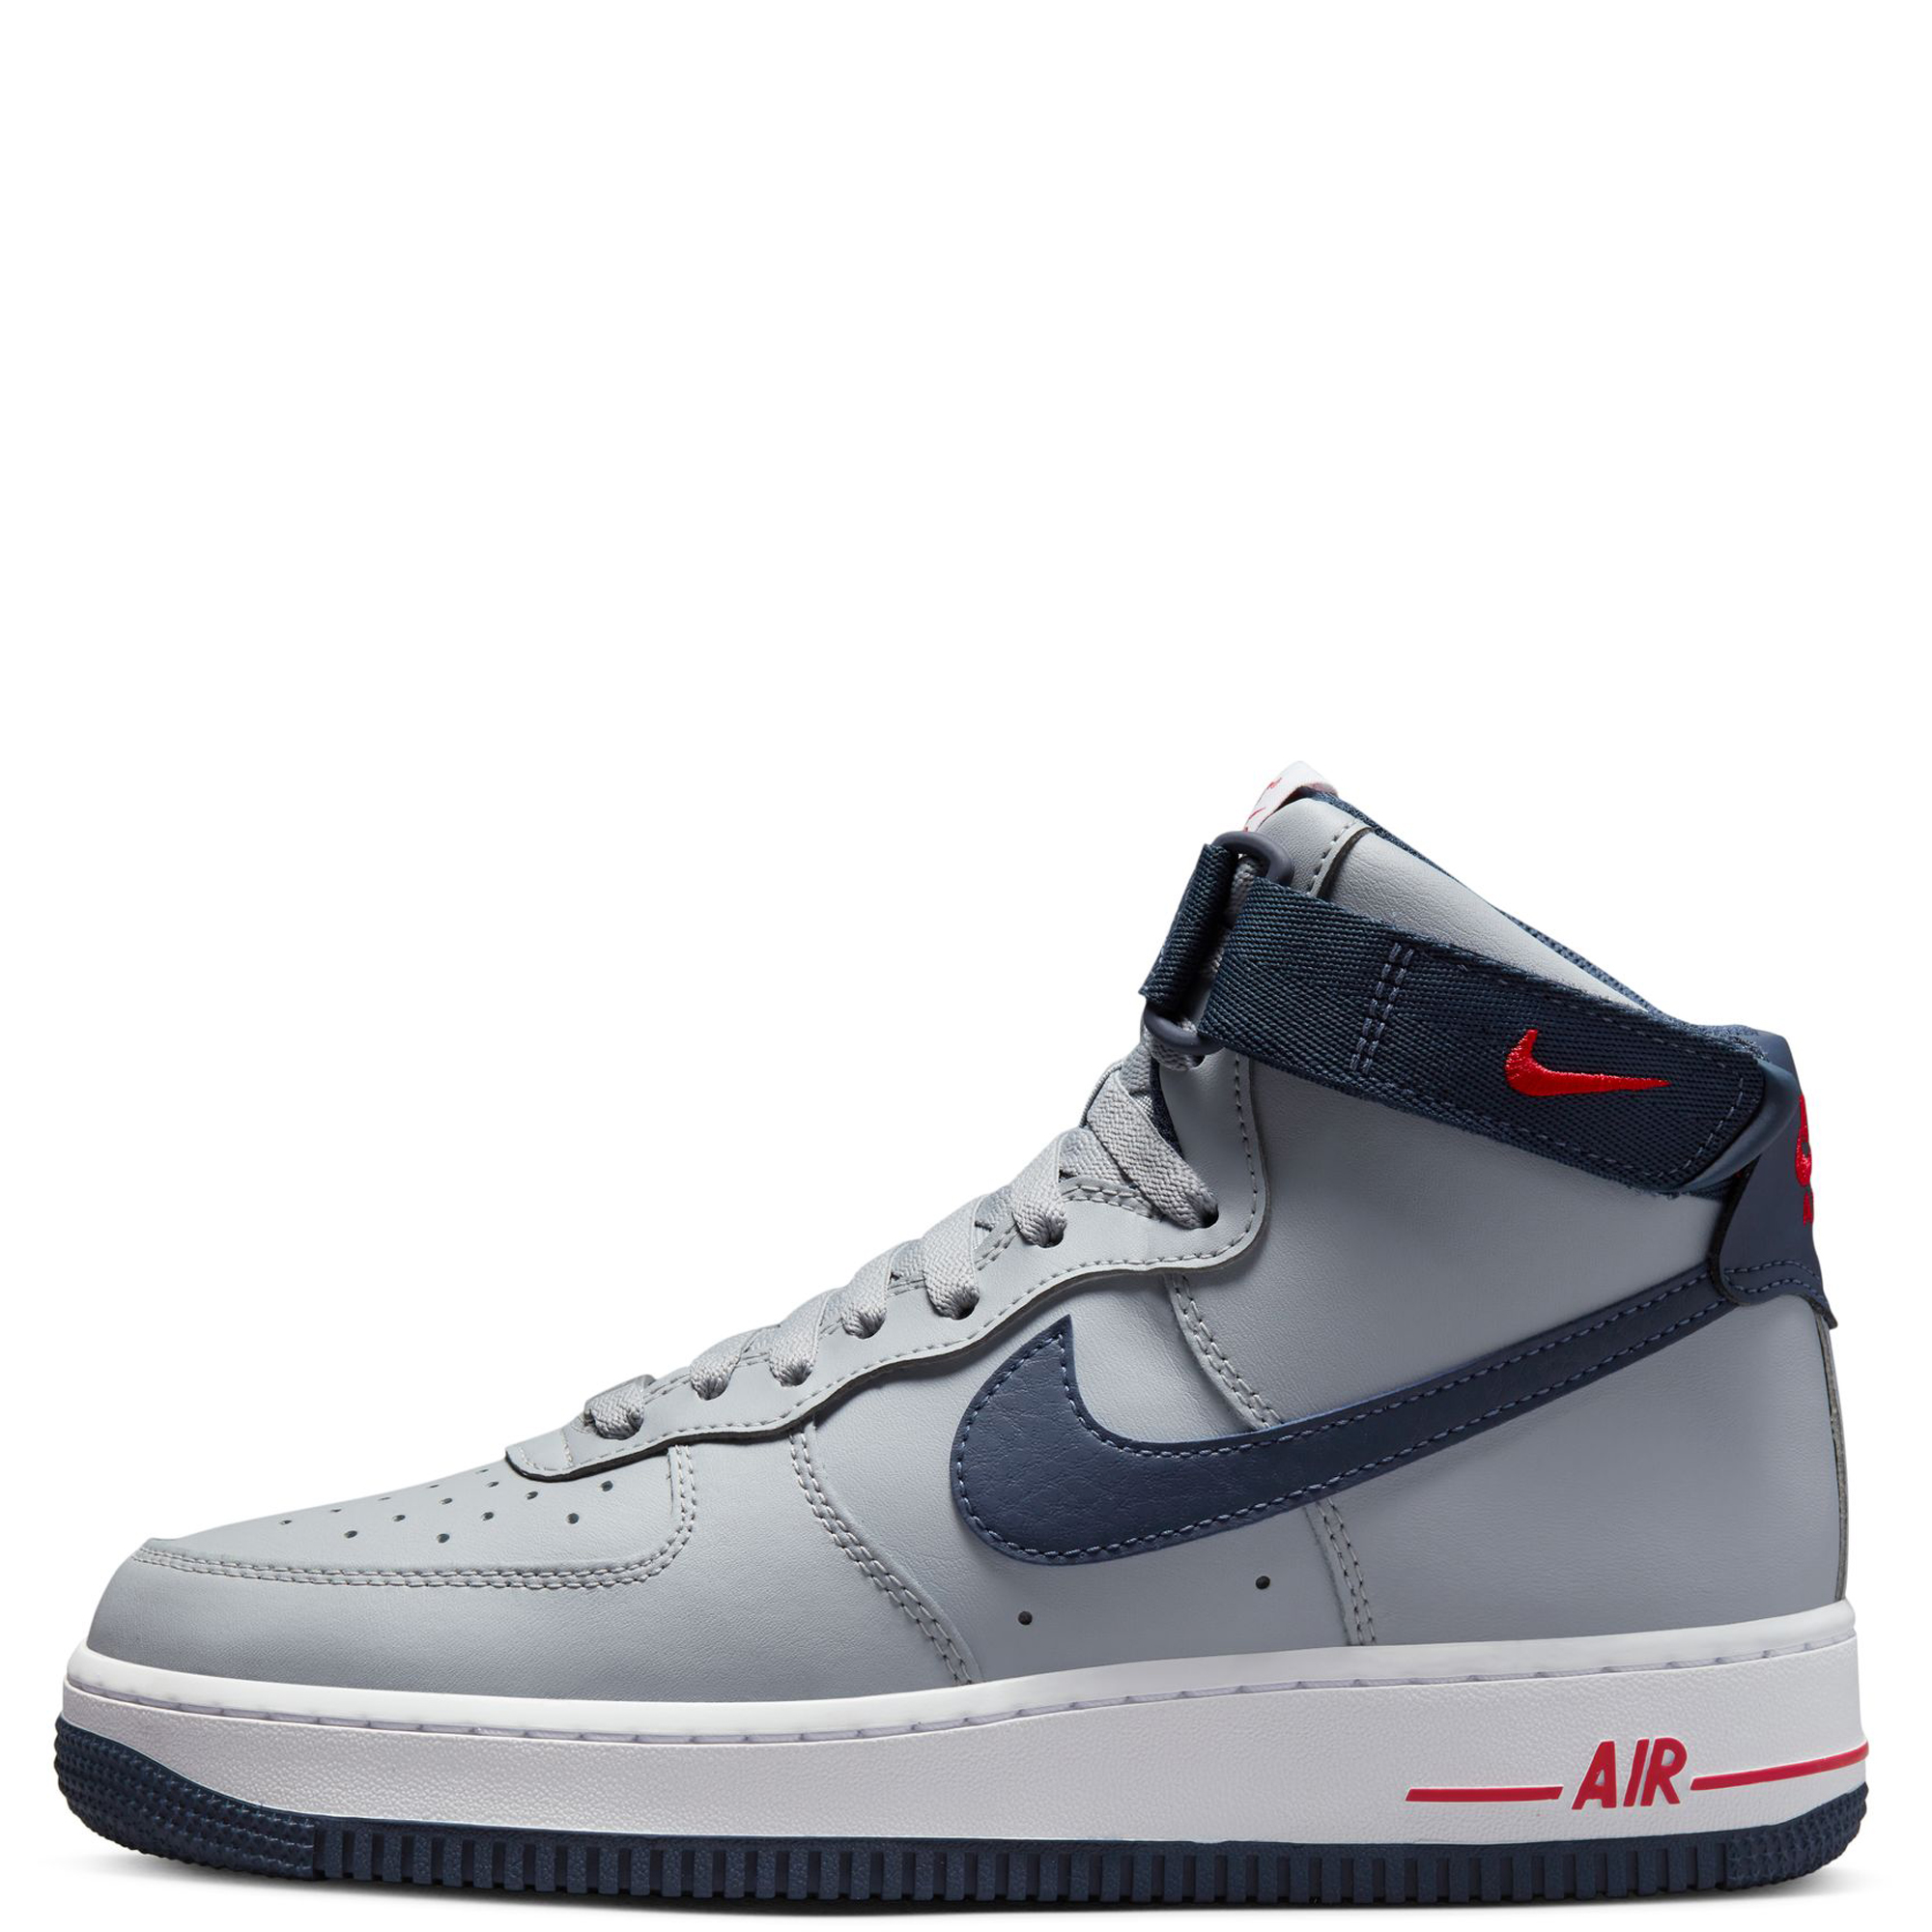 Nike Air Force One (m)  Nike air force ones, Nike air force, Navy blue  shoes